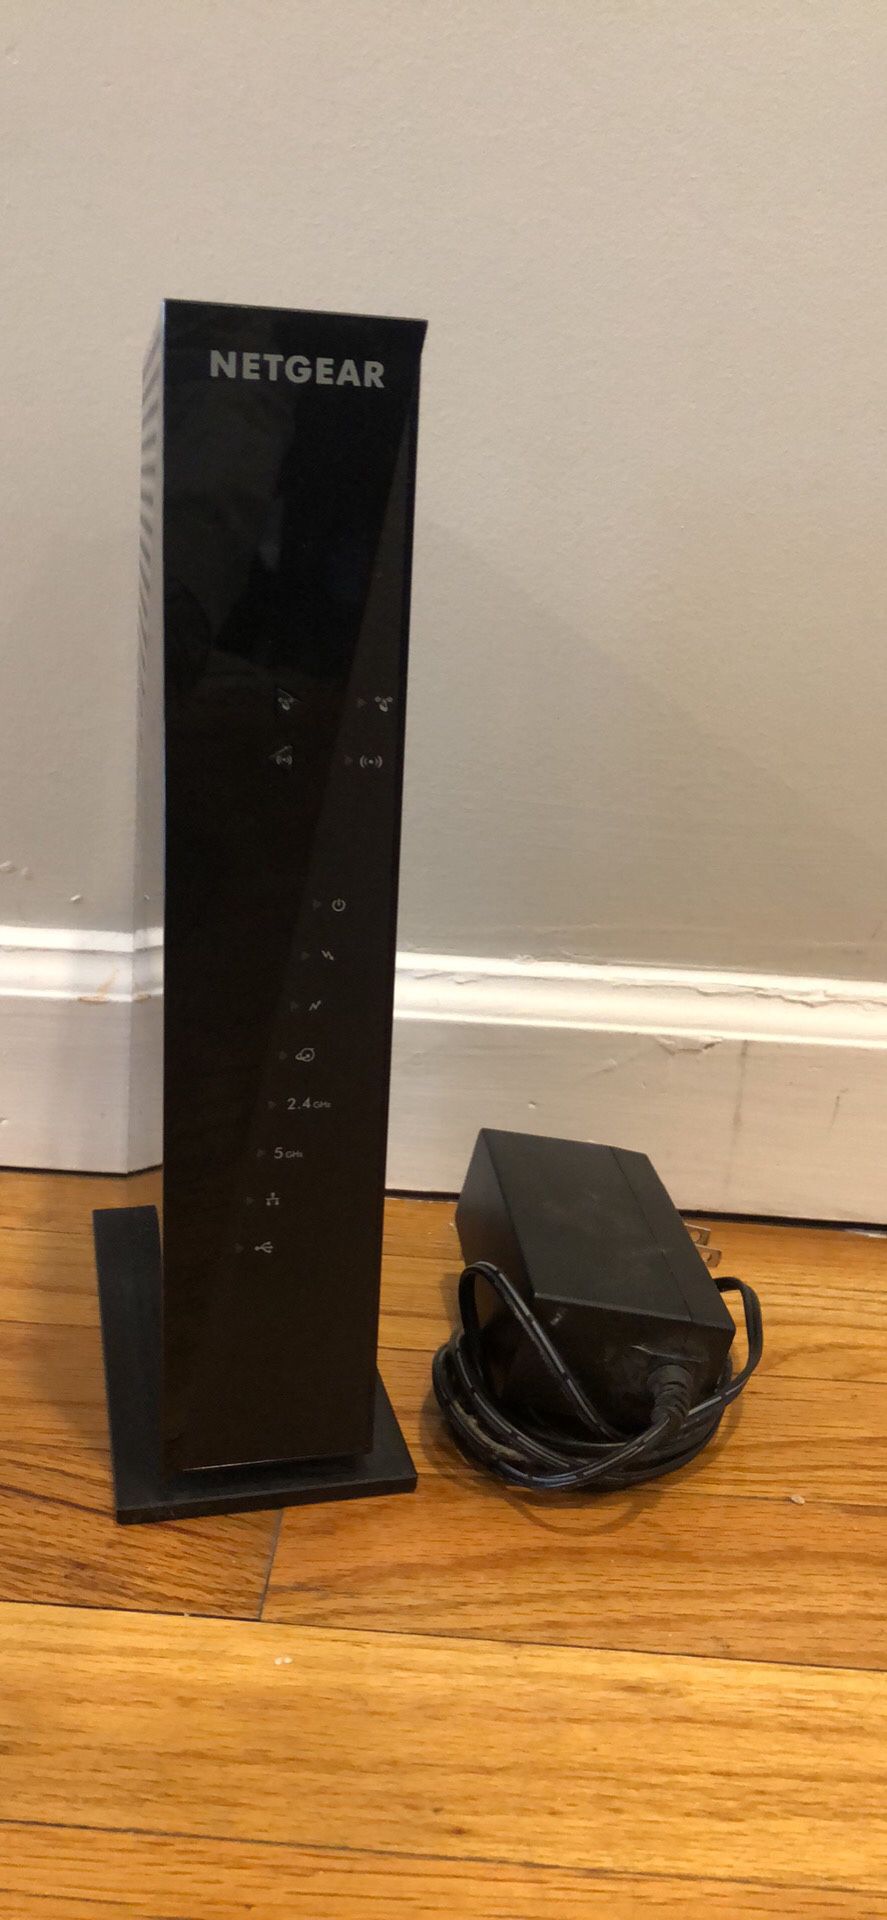 Netgear 2 in 1 Cable Modem & Router